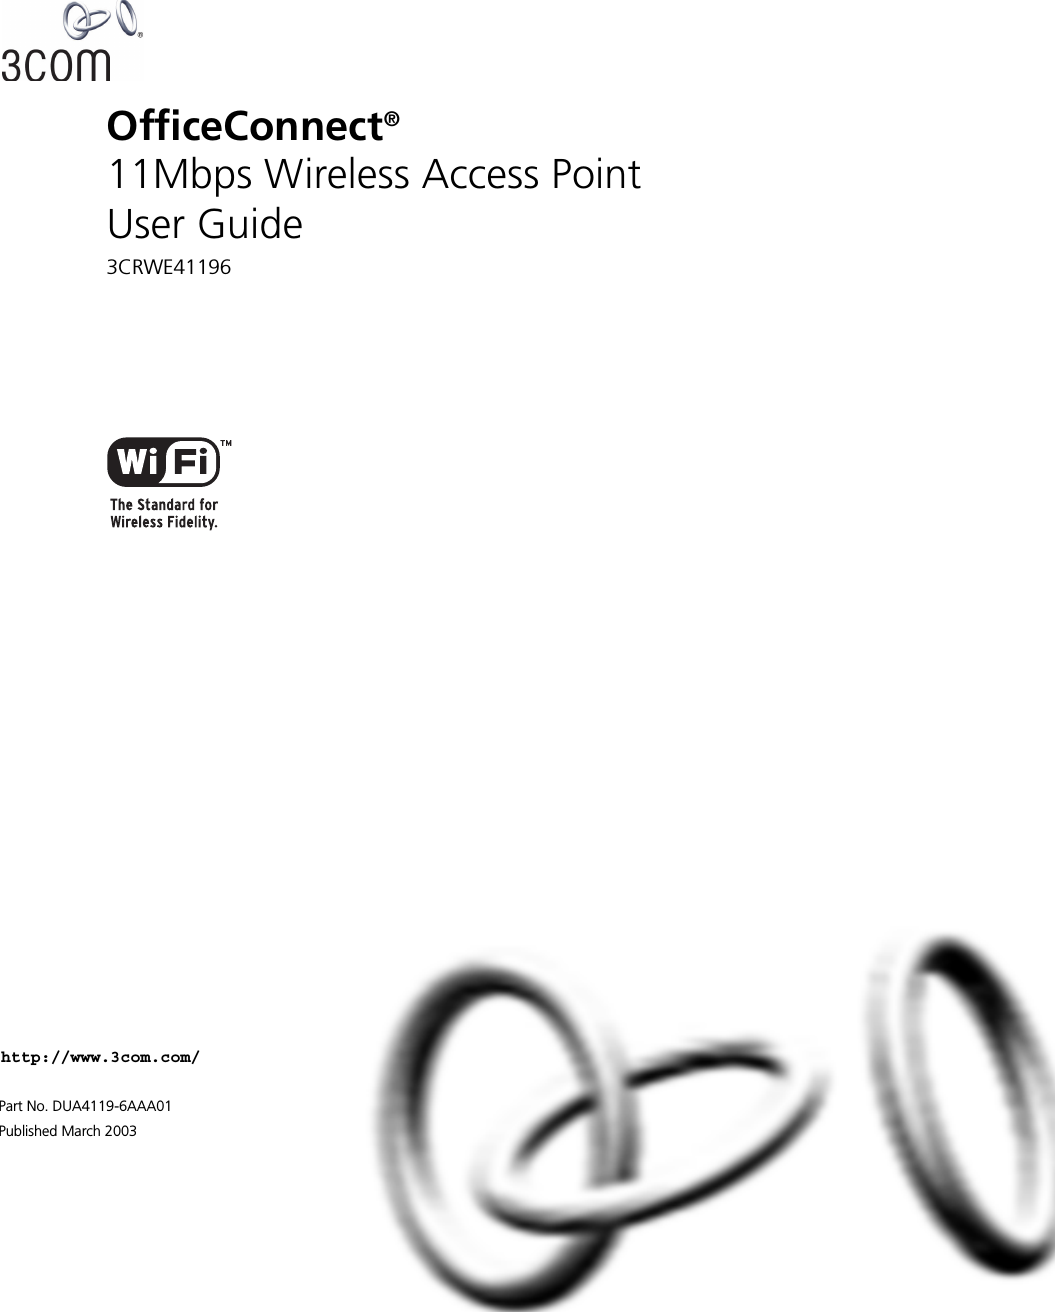 http://www.3com.com/Part No. DUA4119-6AAA01Published March 2003OfficeConnect® 11Mbps Wireless Access PointUser Guide3CRWE41196